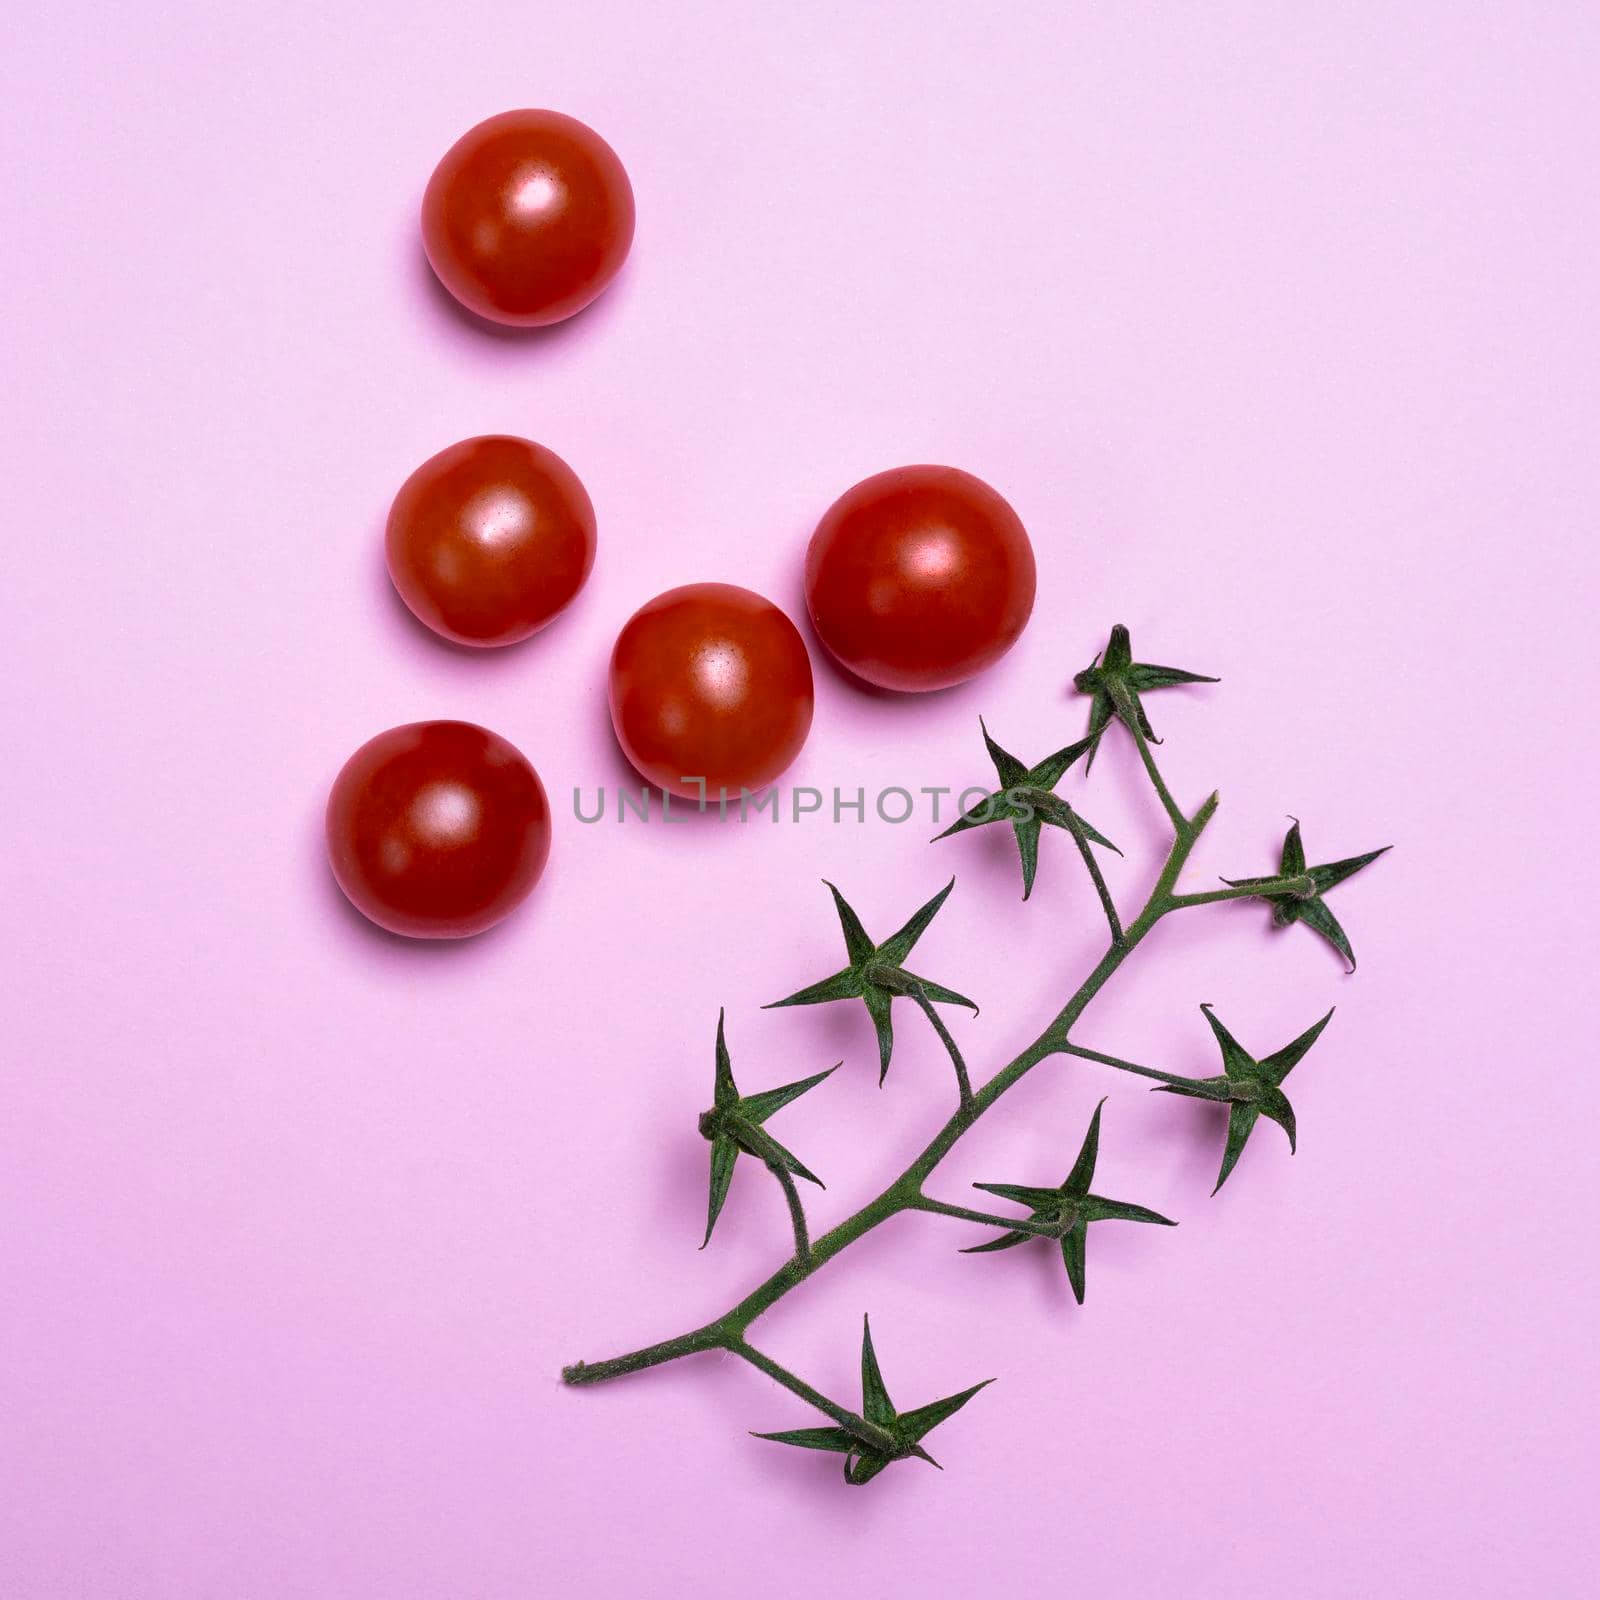 composition formed with some small Pachino tomatoes on a pink surface